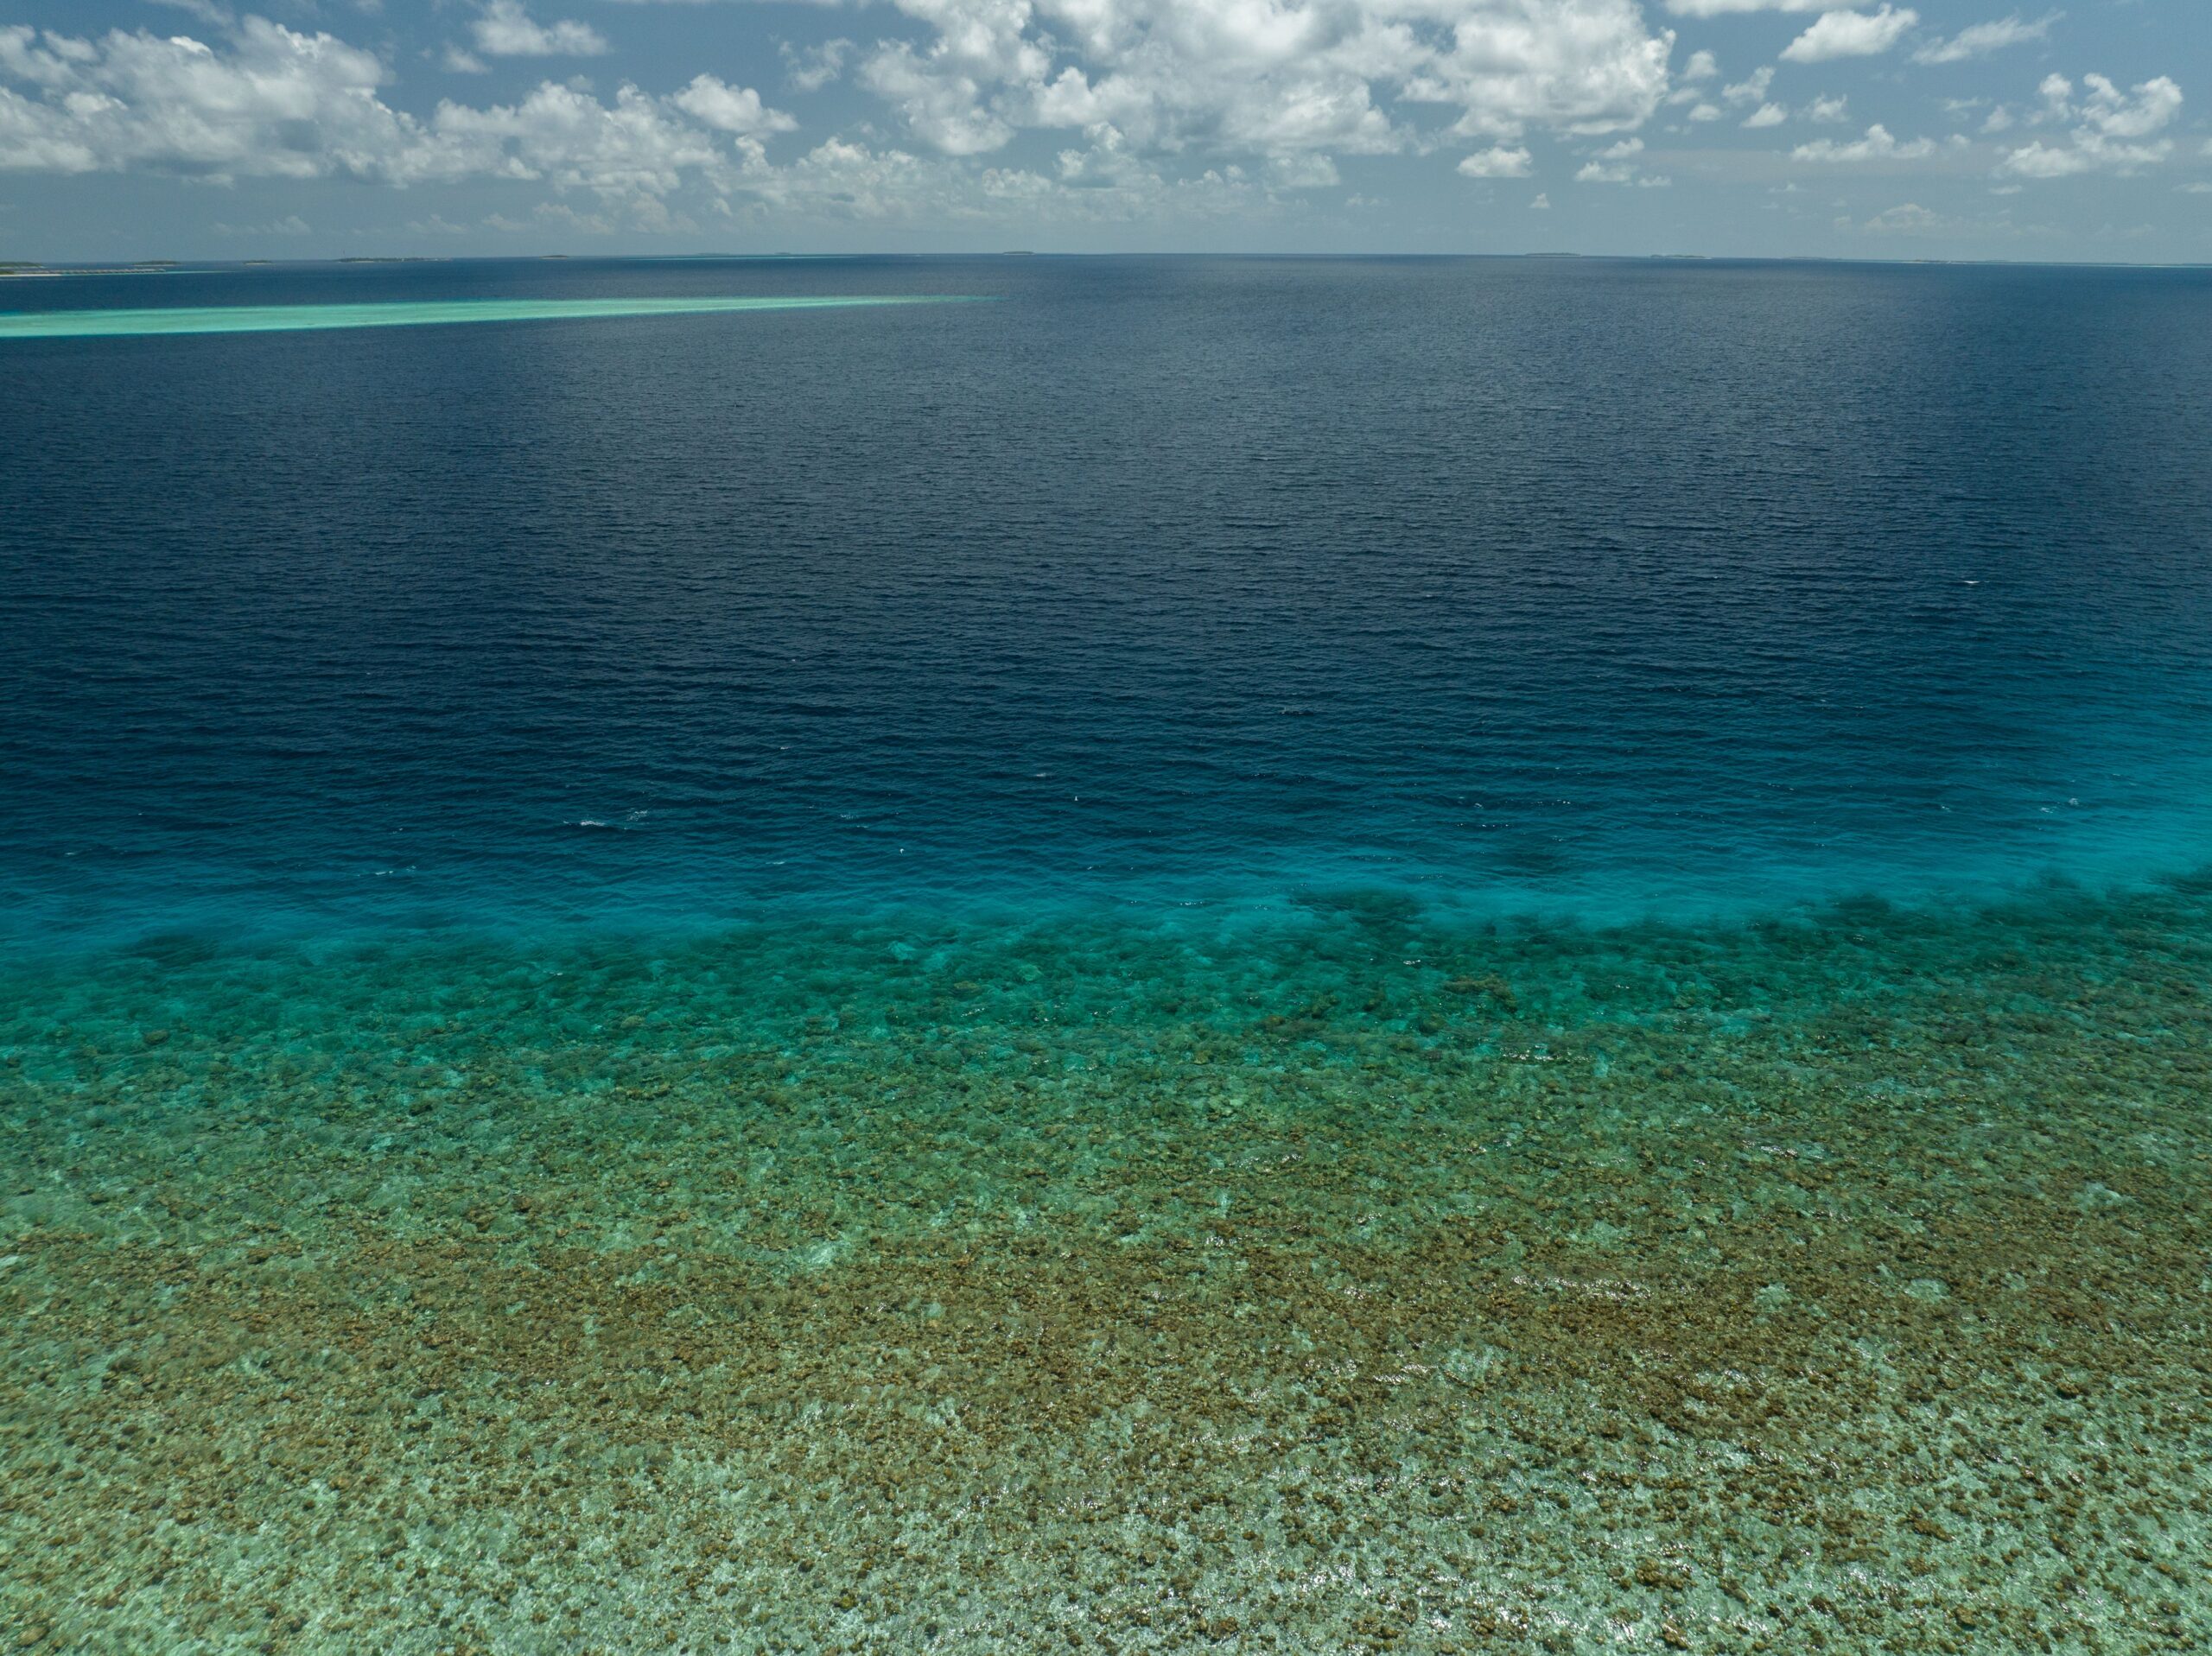 A view of the Maldives from a height, showing the reef.